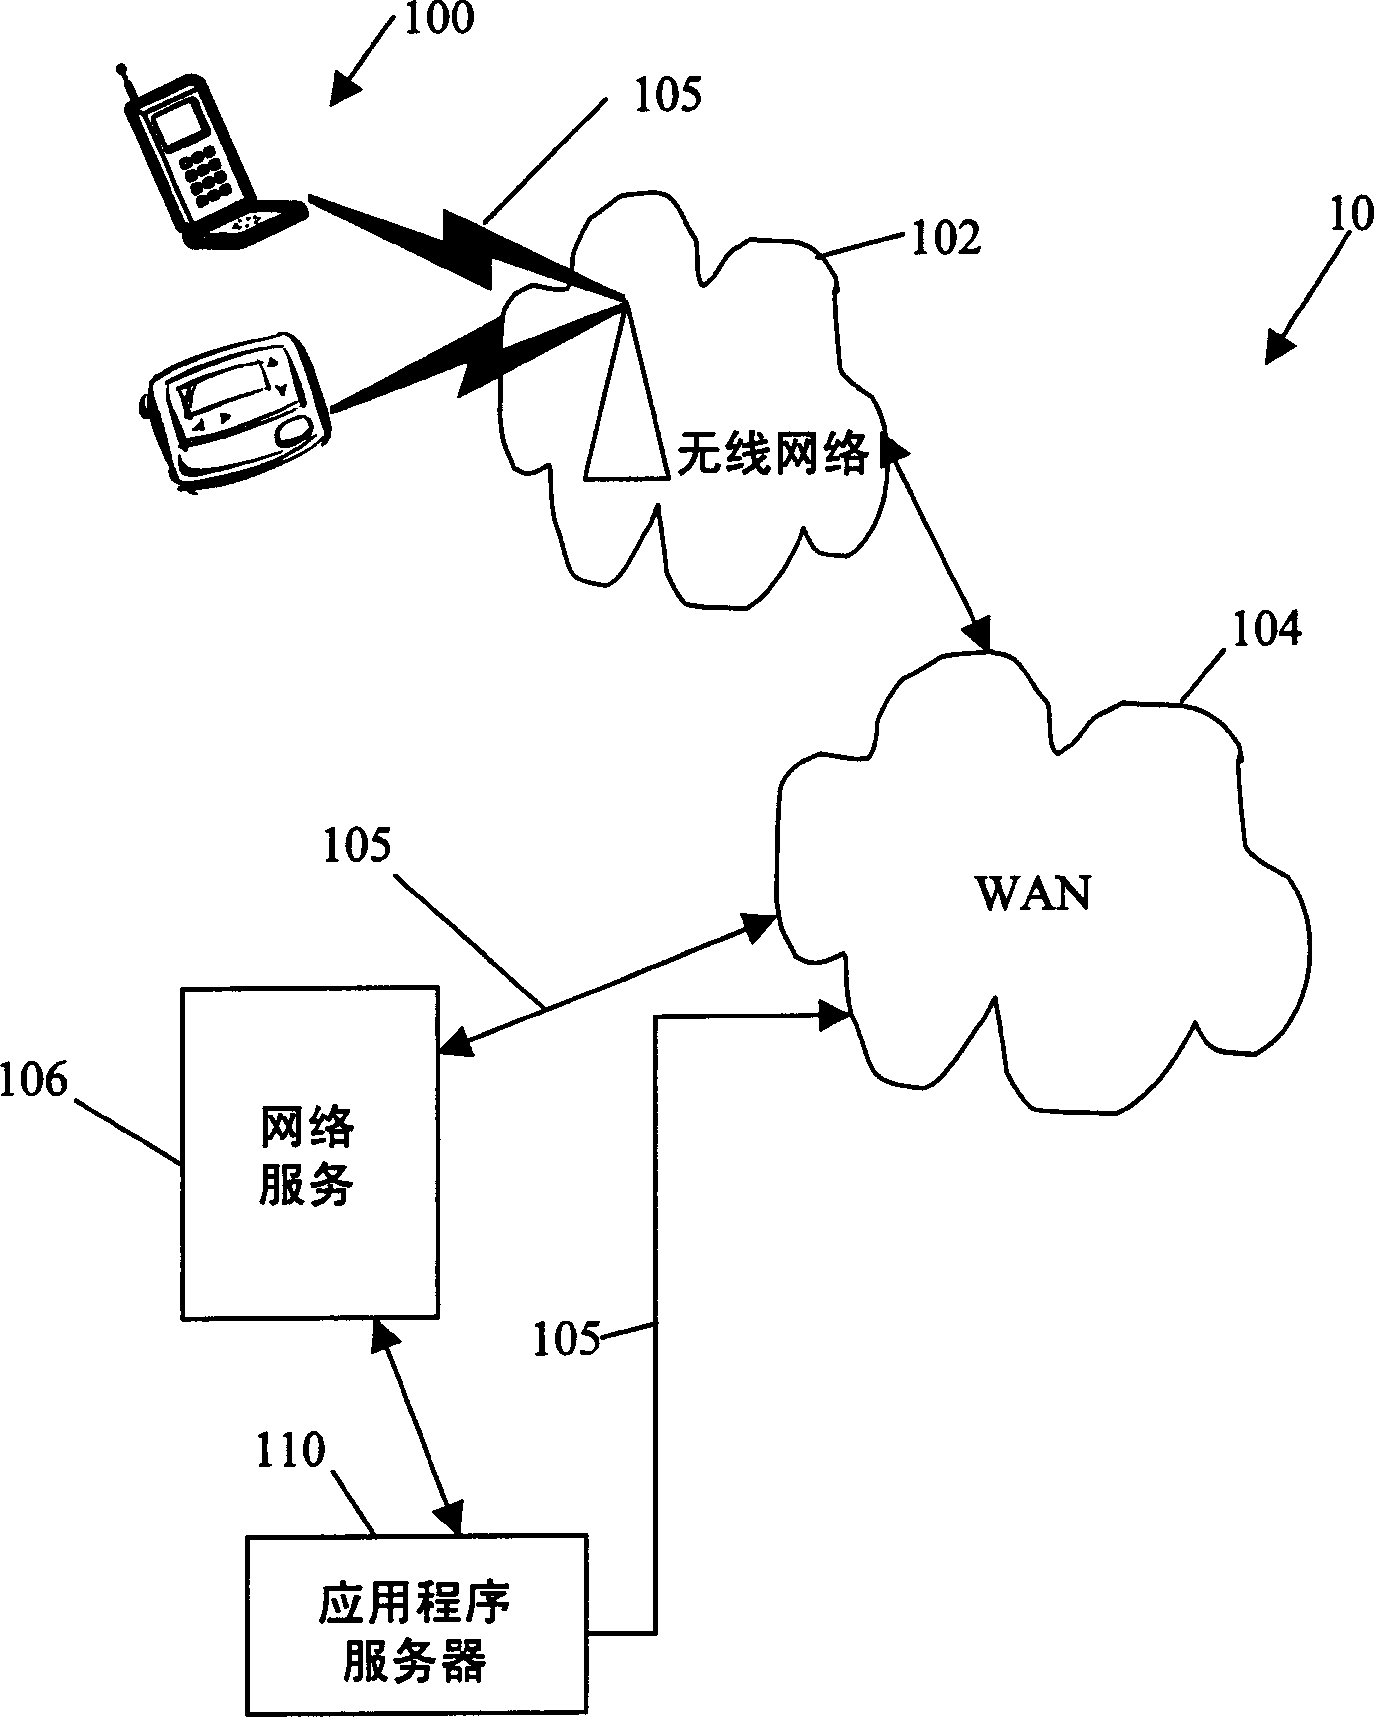 System and method for building wireless applications